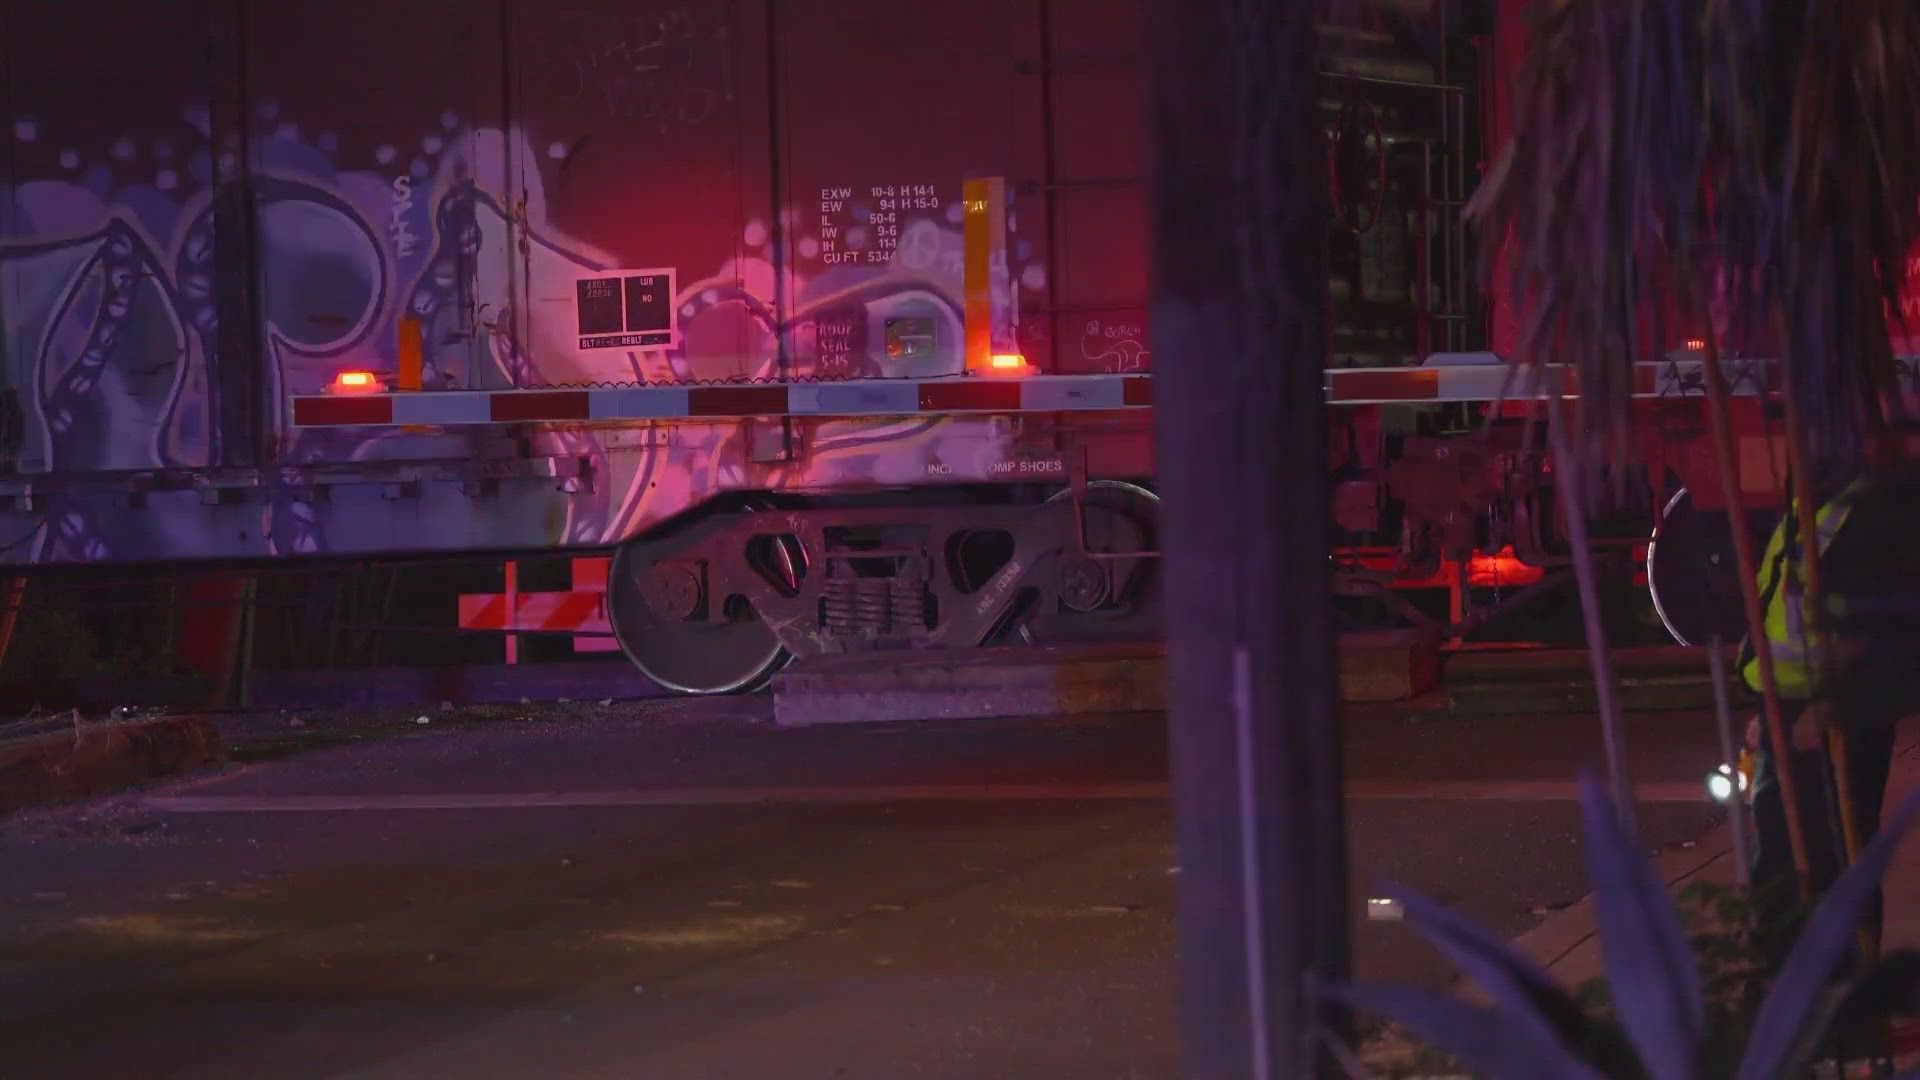 Police say the man was under the influence of something when he was hit by a train early Friday morning.